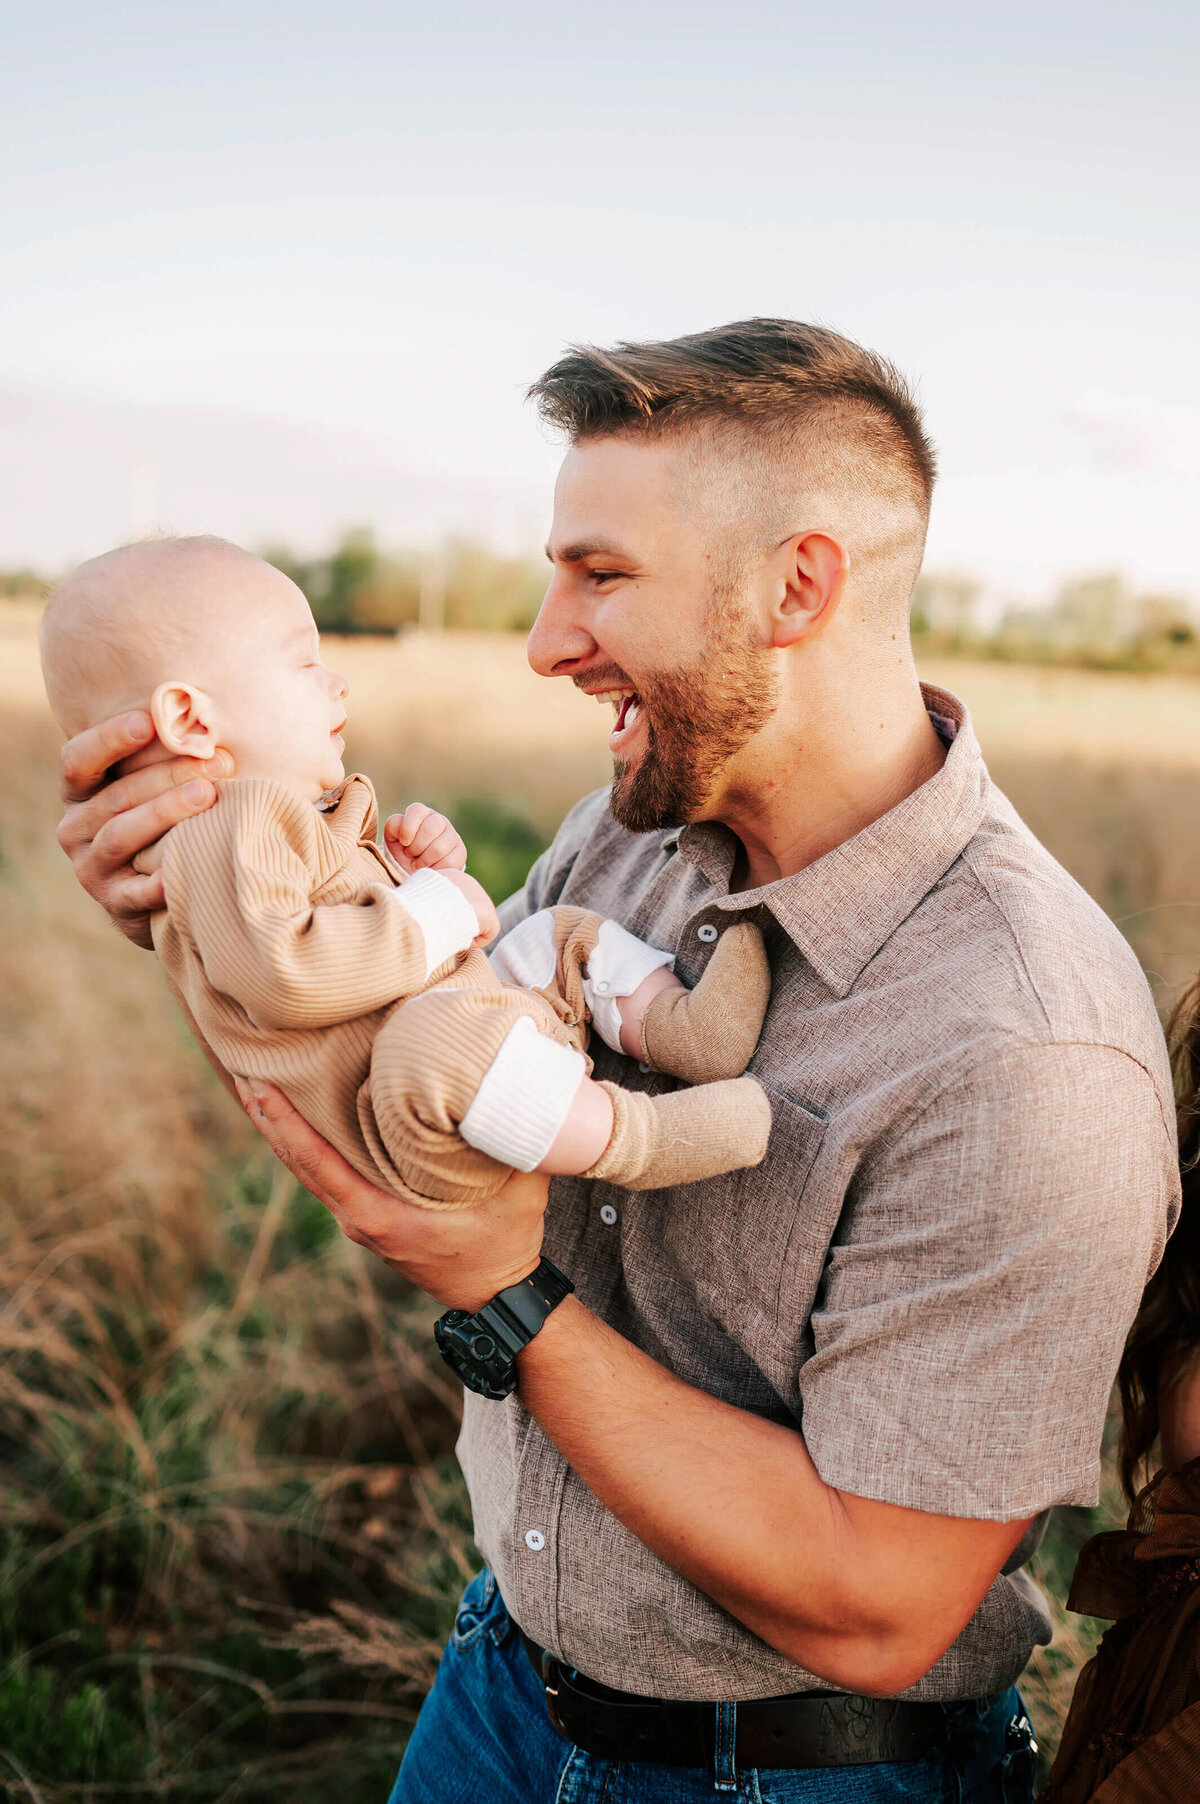 Branson family photo of dad smiling at baby in a field at sunset